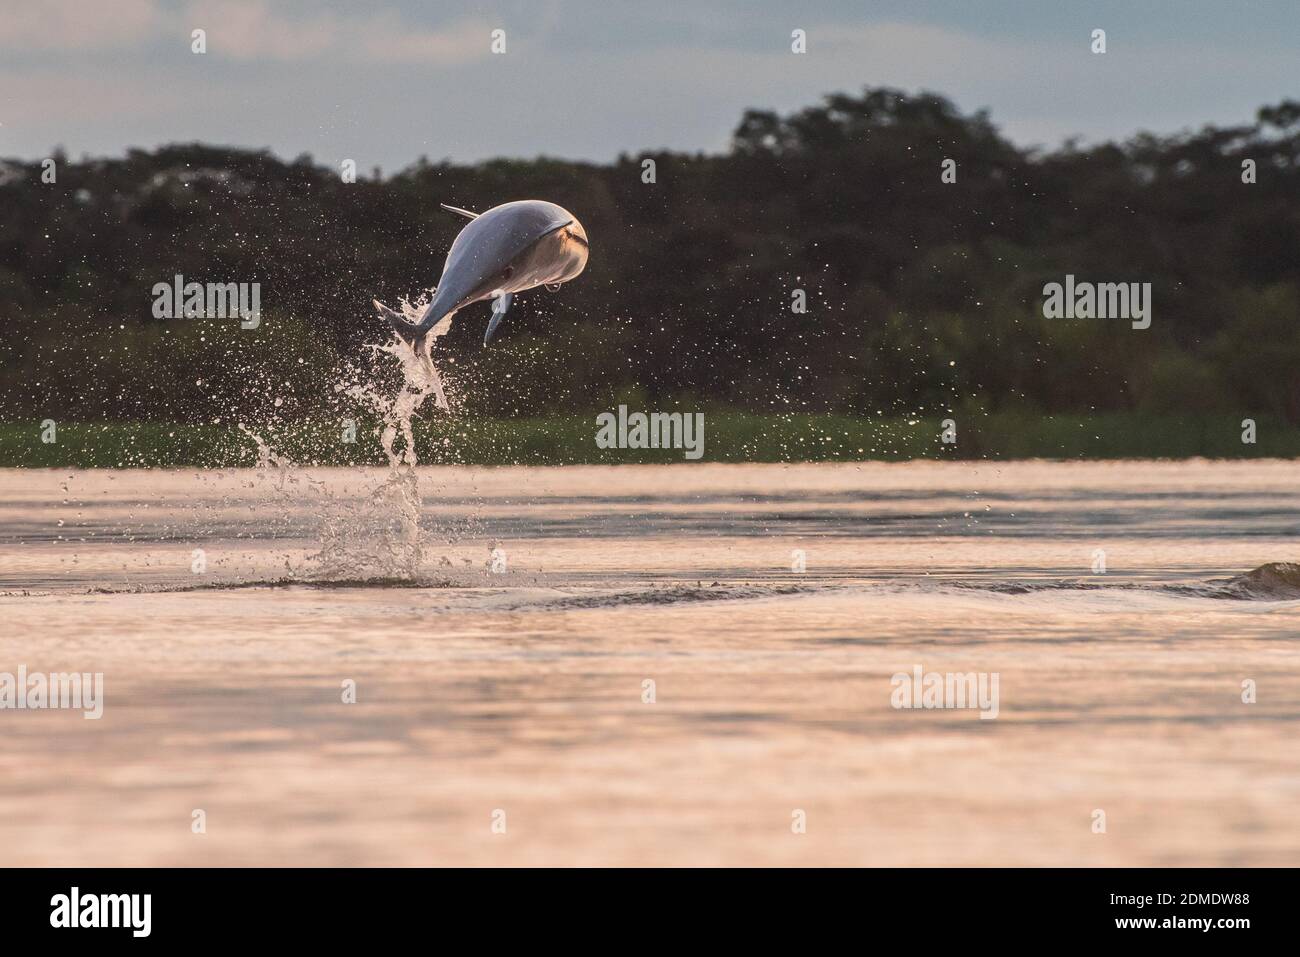 An endangered tucuxi freshwater dolphin (Sotalia fluviatilis) jumps from the river near the border or Peru, Brazil & Colombia in the Amazon basin. Stock Photo